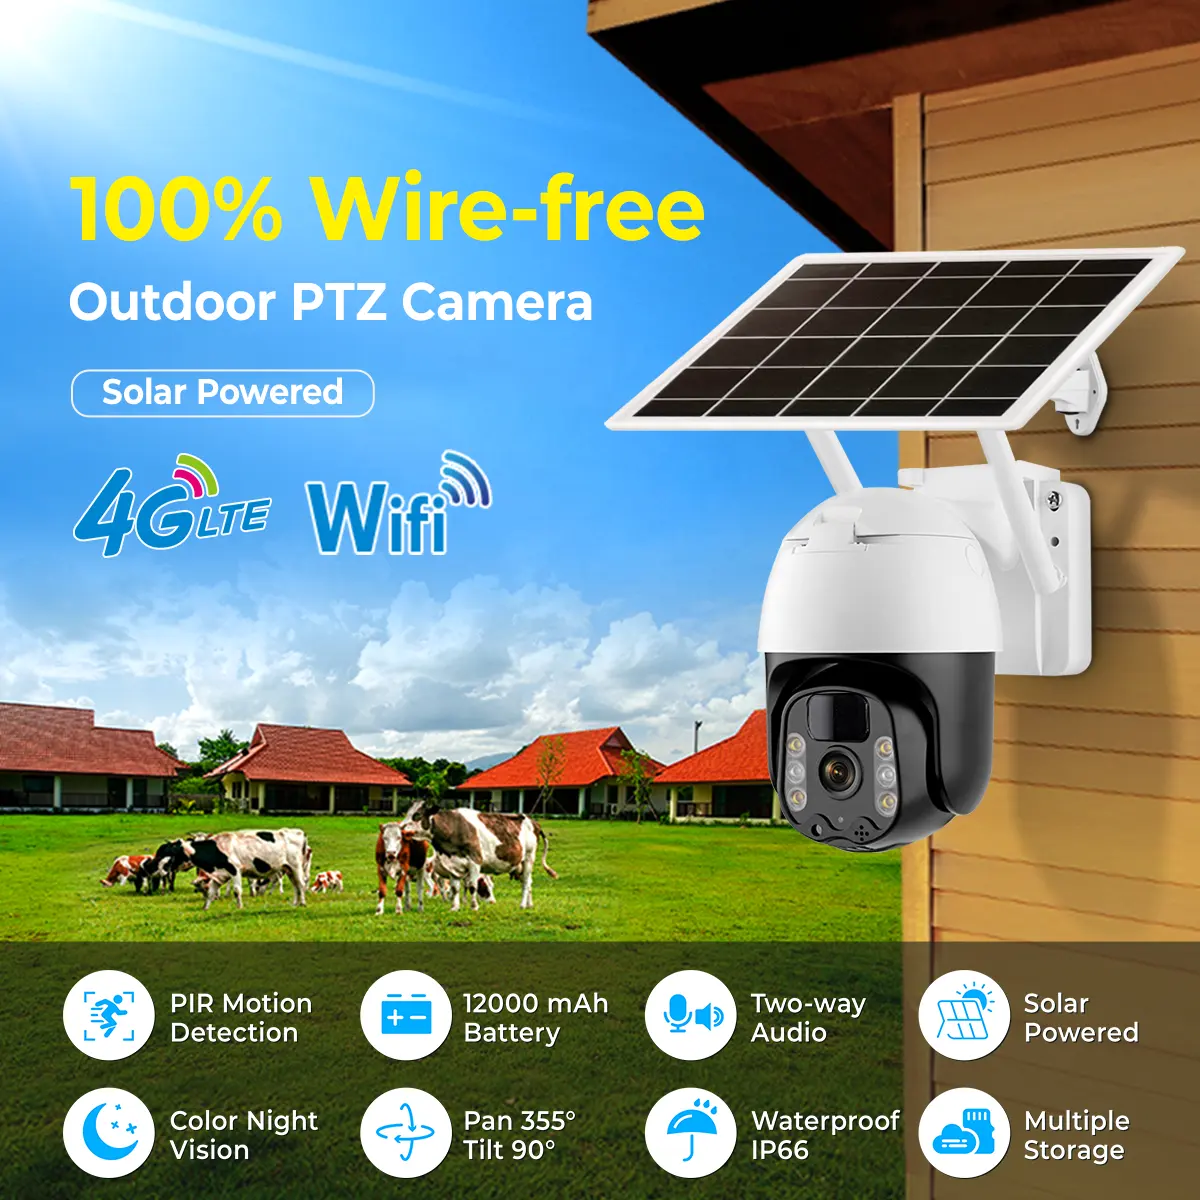 12000mAh rechargeable battery solar powered ptz colorful night vision 2k outdoor cctv wireless solar ptz camera security system